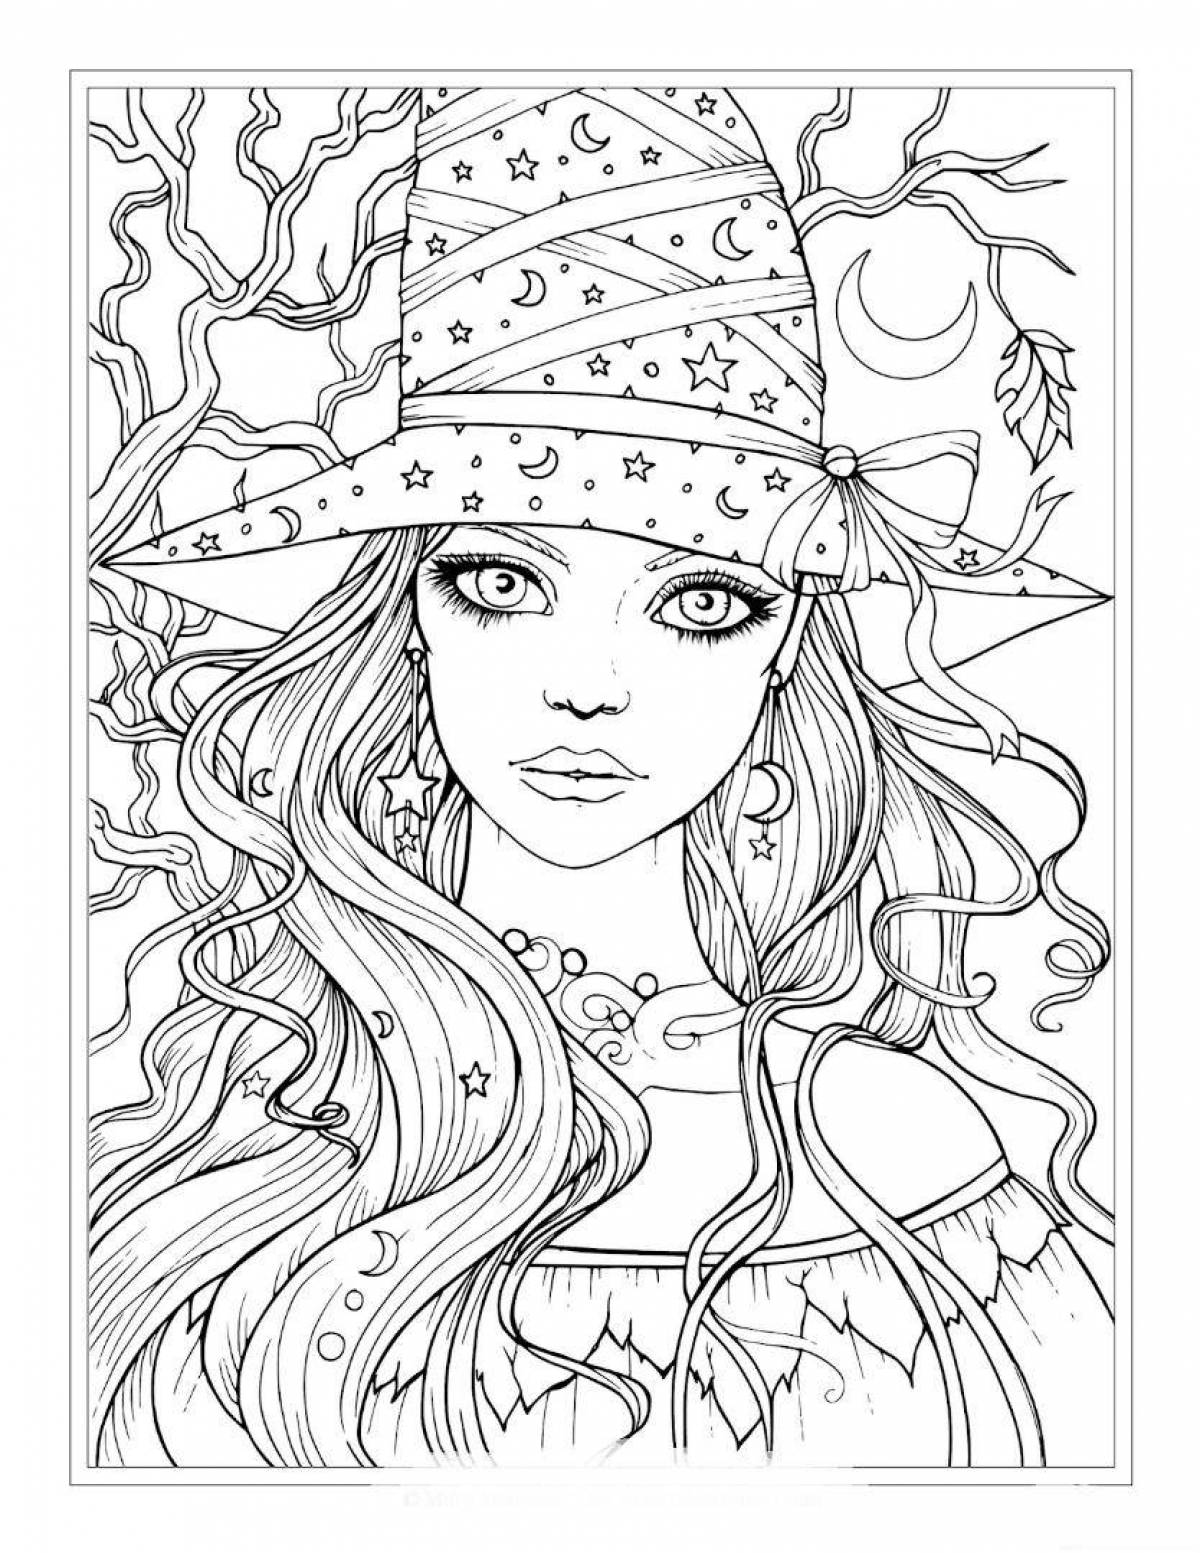 Sublime antistress coloring book for girls 9-10 years old